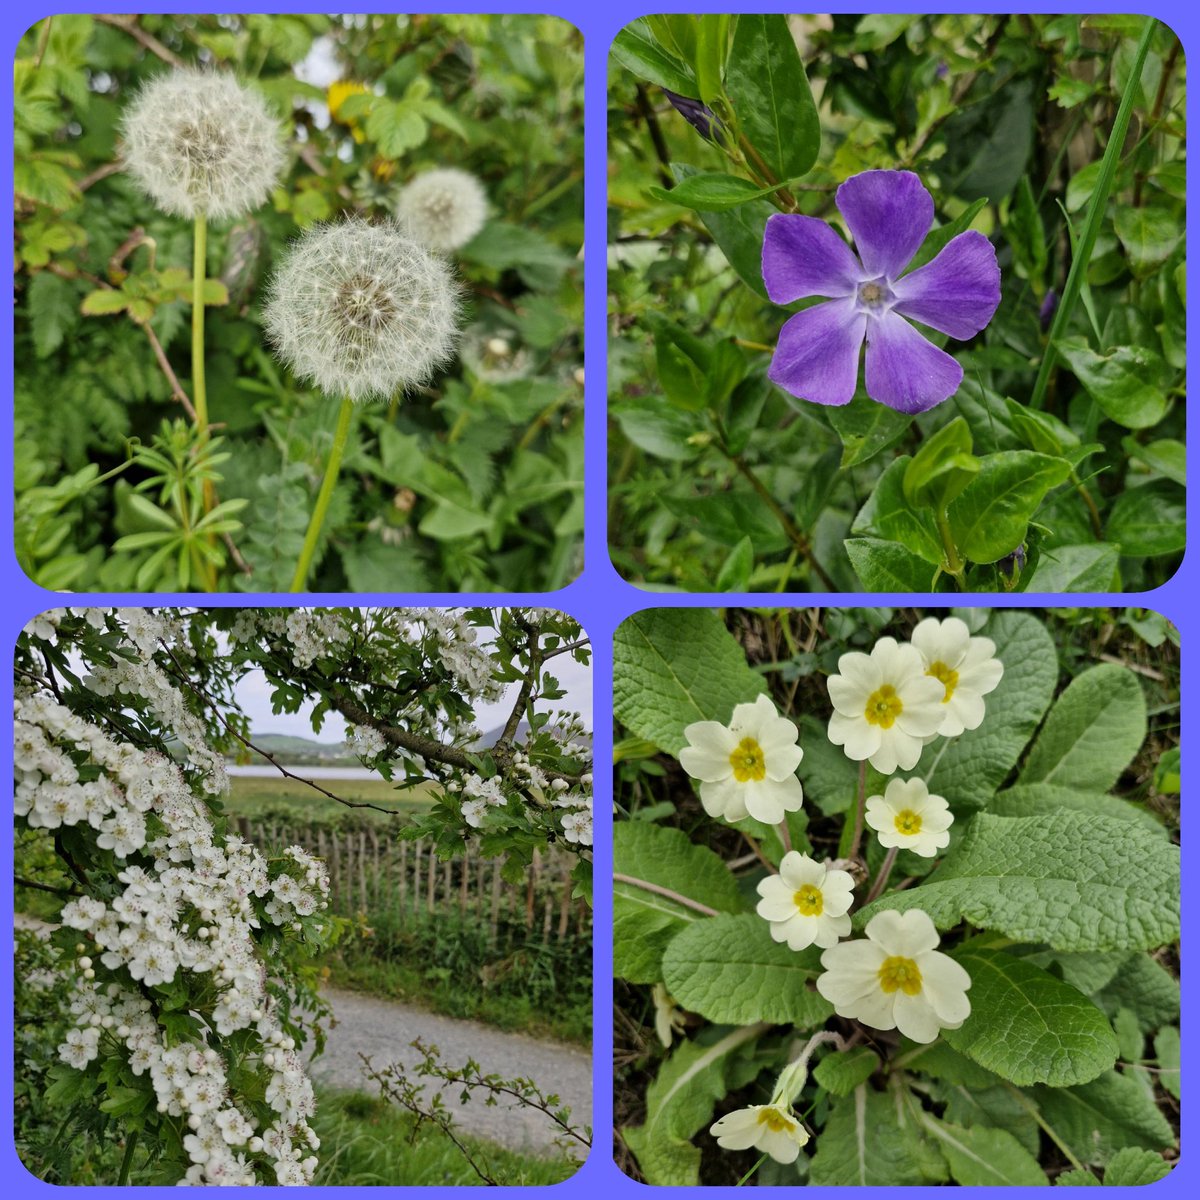 Another mile for @DementiaUK & another reminder of the beauty in #nature 💙💛💙  #Connect #keepactive #wellbeing #MentalWellness @SaintMarysDerry